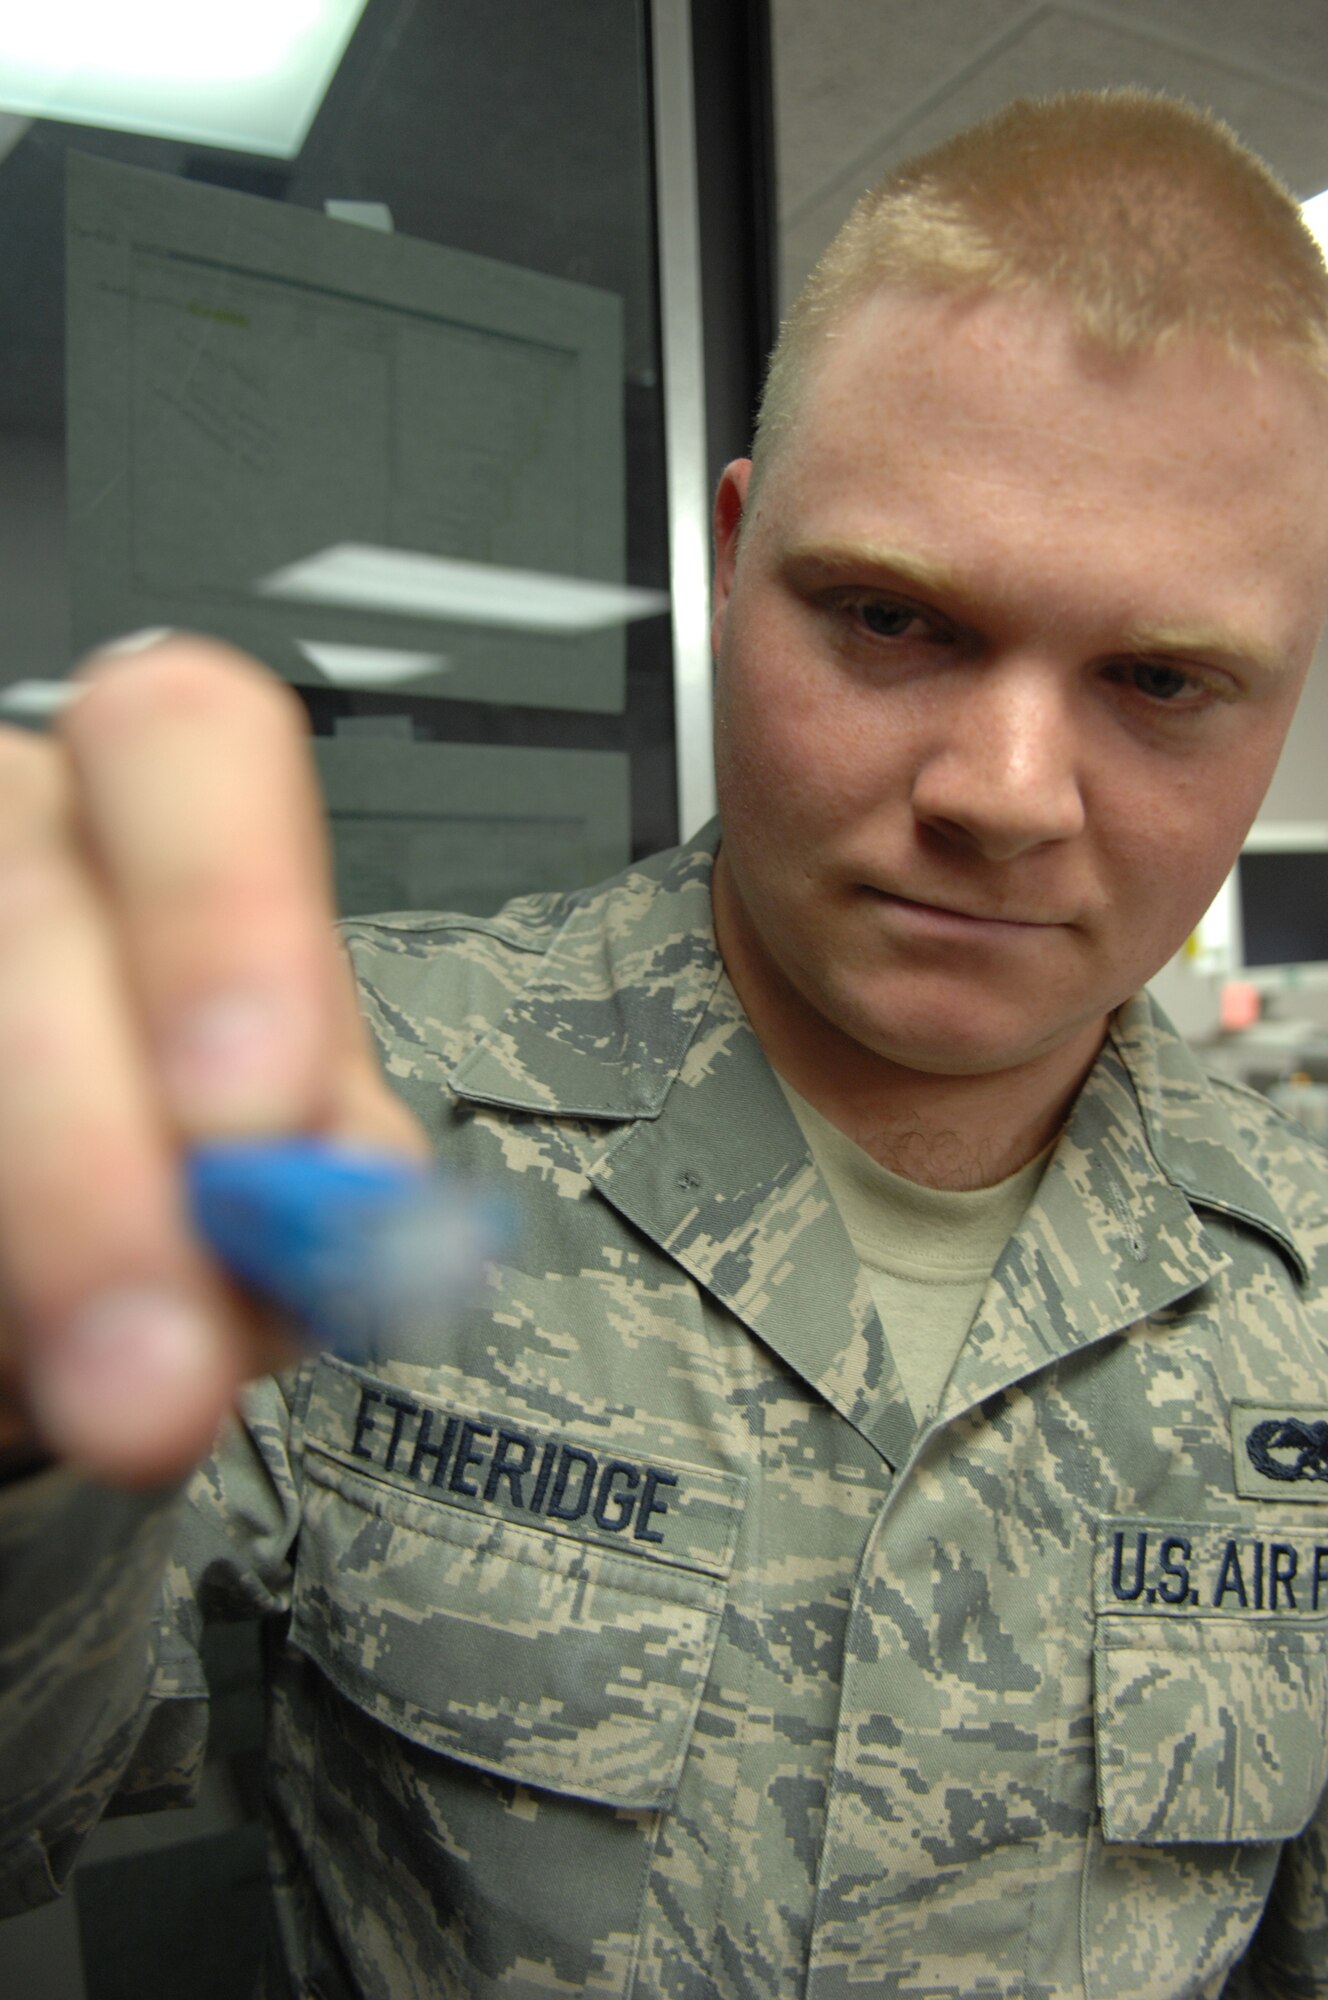 Senior Airman Etheridge, shows the existing Cat-5 cable from a patch panel at Holloman Air Force Base, N.M. May 05. SrA Etheridge is an infrastructure technician assigned to the 49th Communications Squadron.
(U.S. Air Force photo/ Senior Airman Anthony Nelson Jr)  
